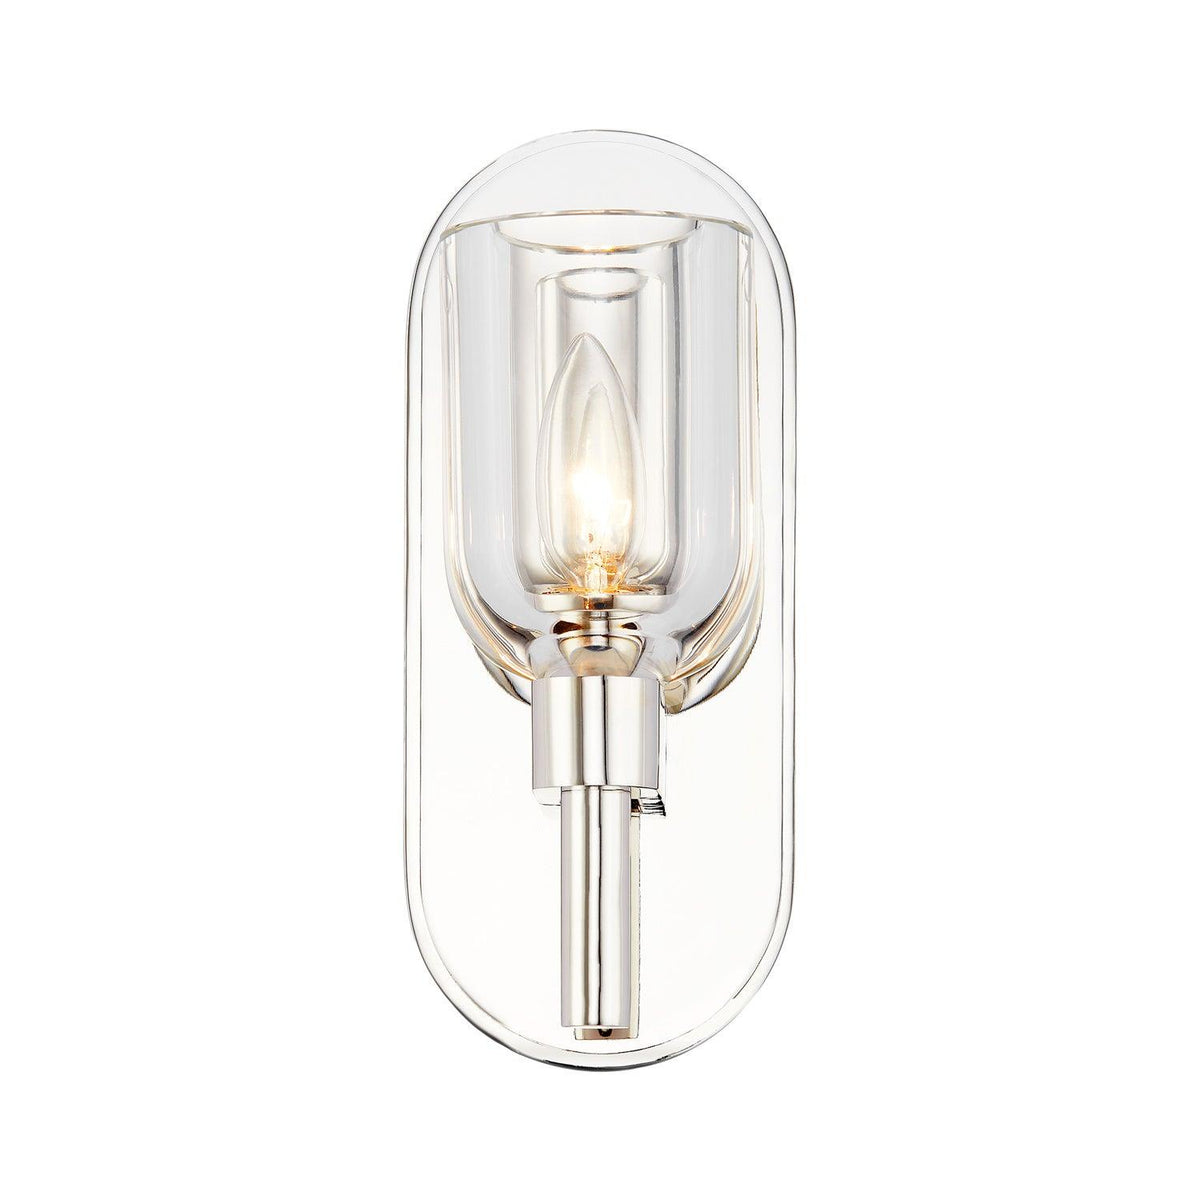 Alora Lighting - Lucian Wall Sconce - WV338101PNCC | Montreal Lighting & Hardware